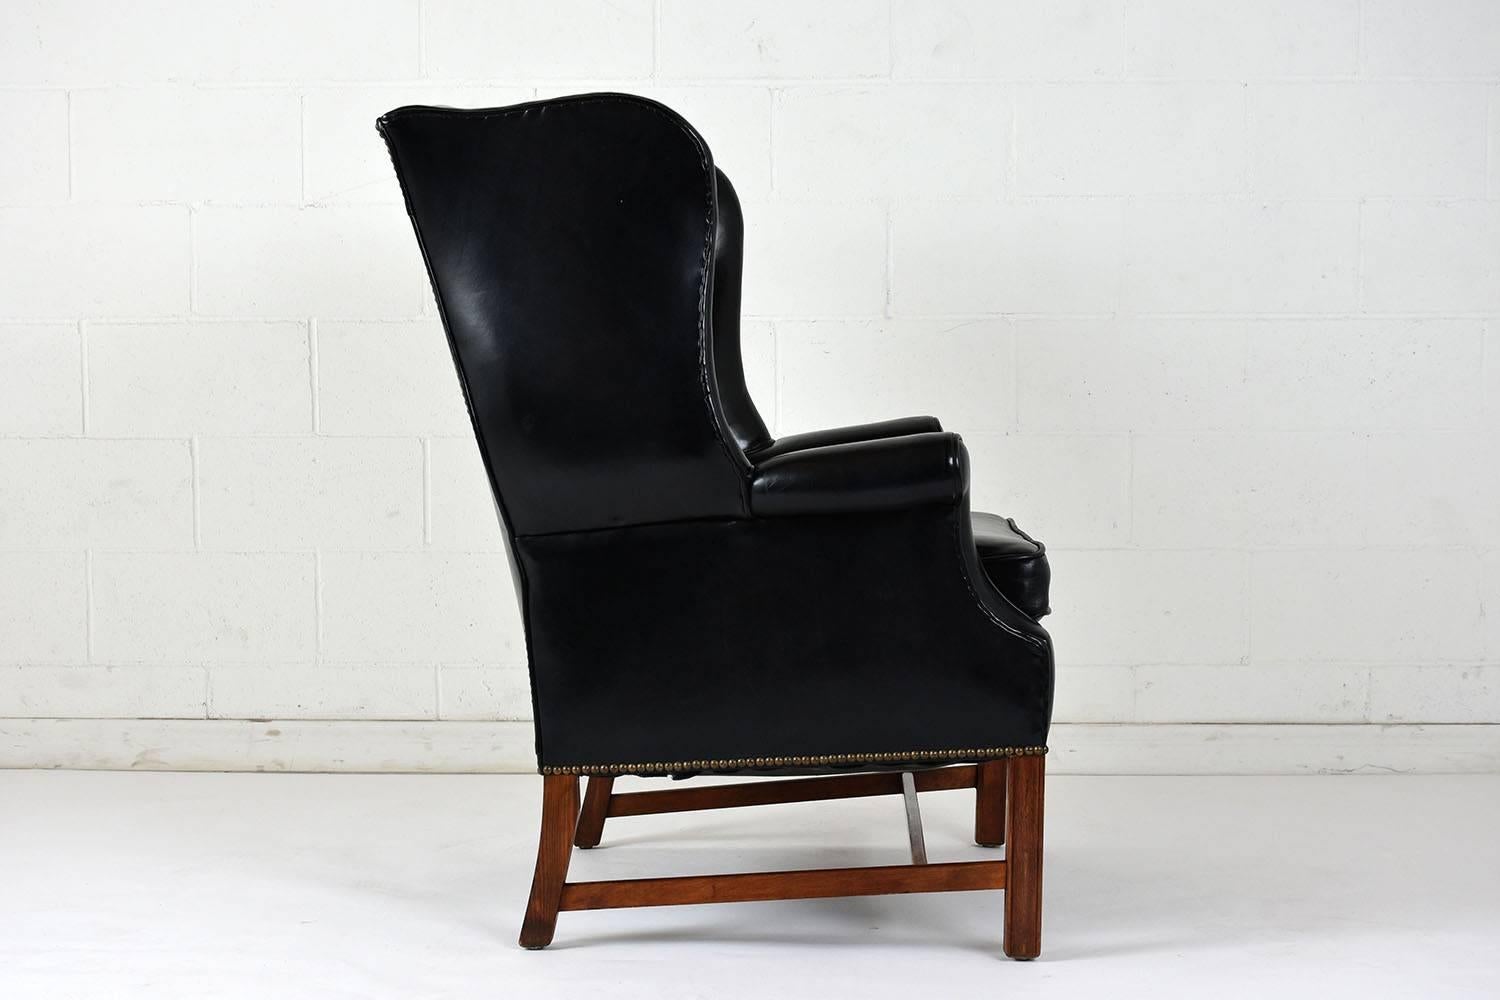 Carved Early 20th Century English Regency-style Wingback Leather Chair